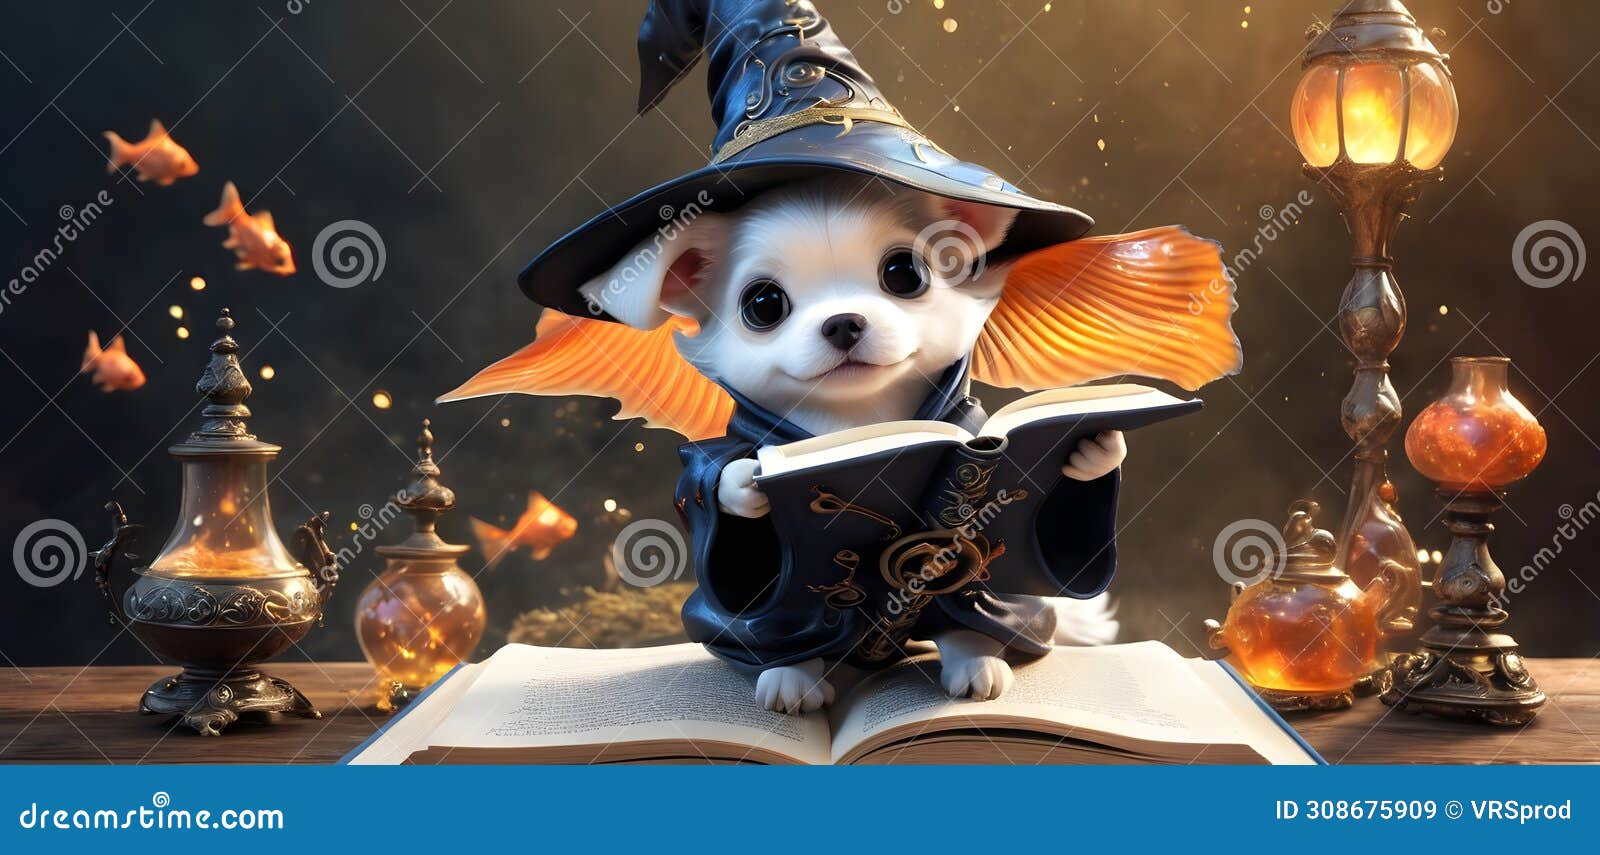 puppy sorcerer in mystic study